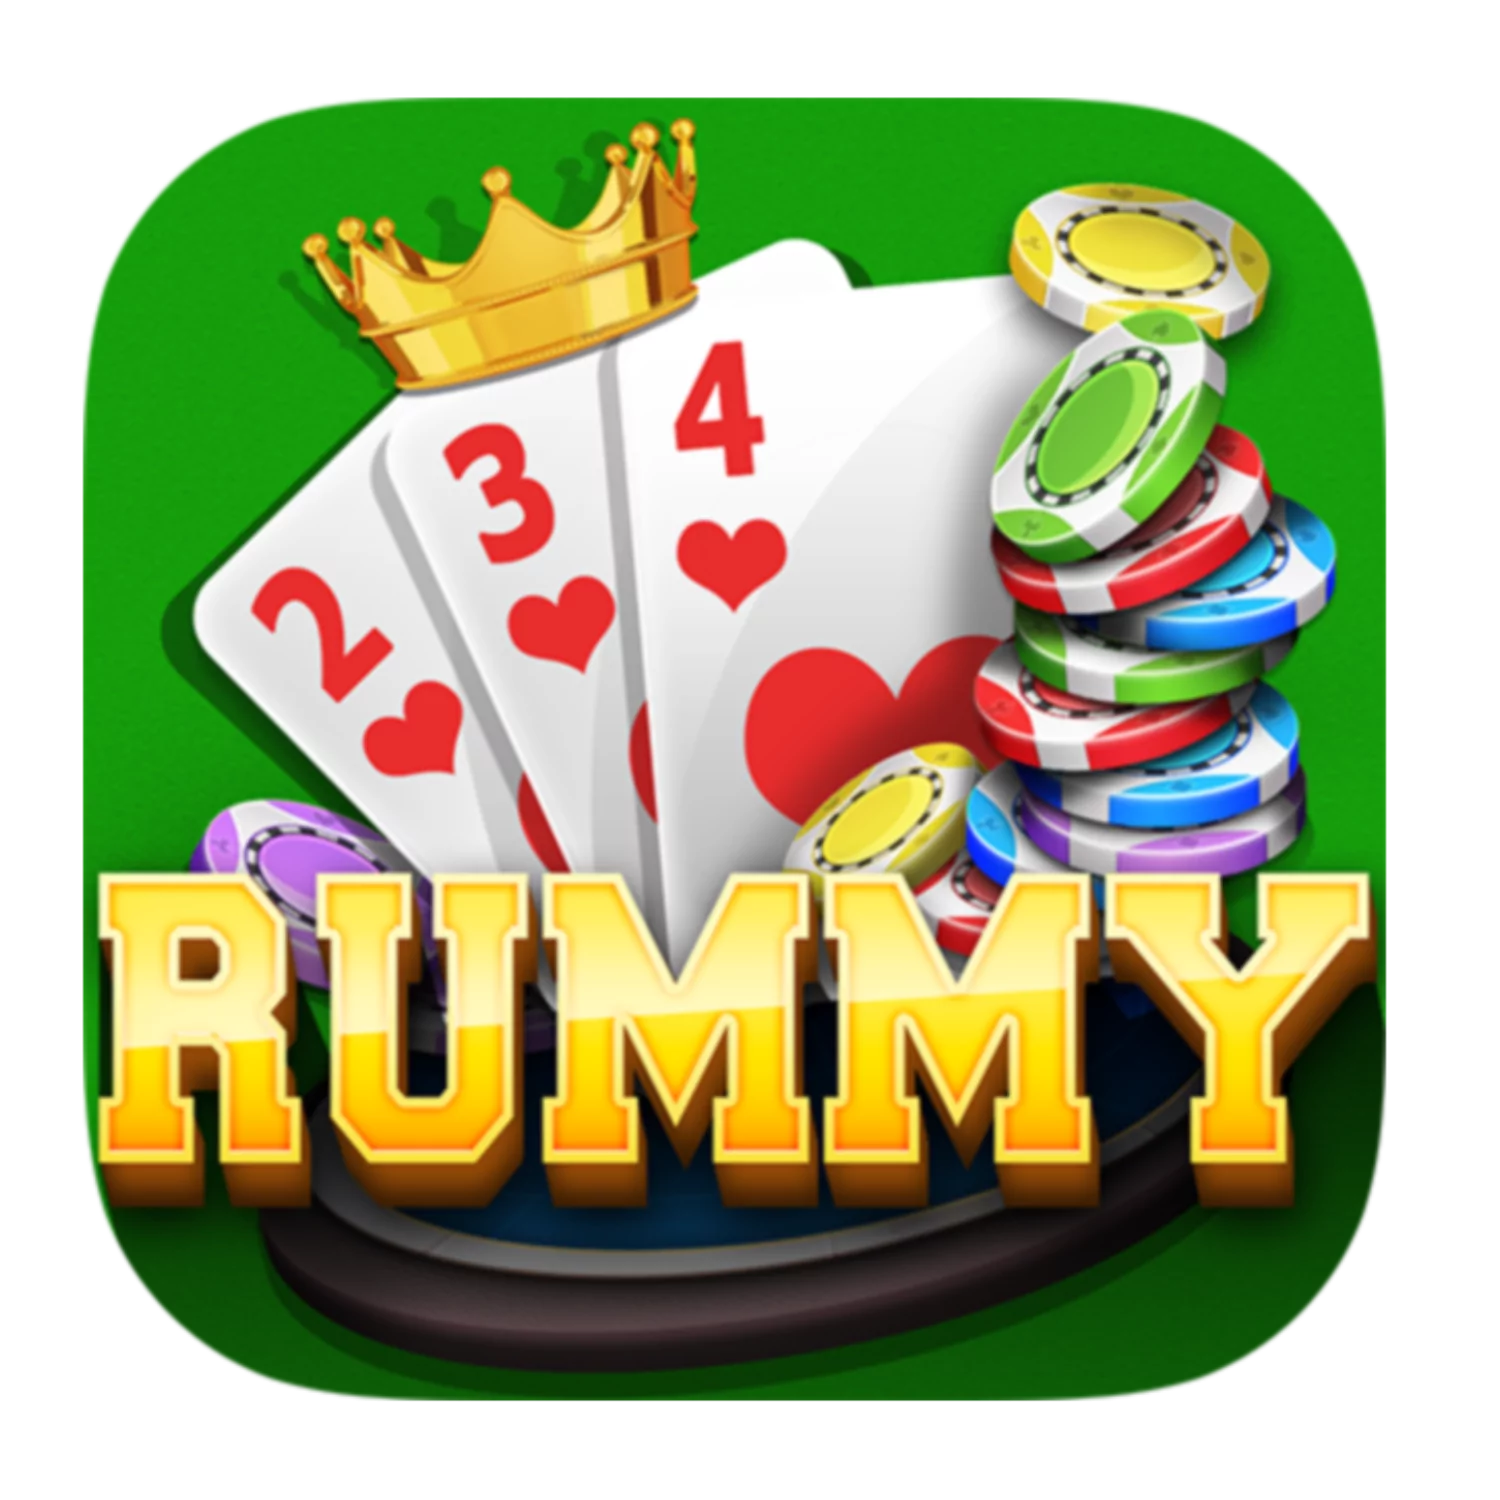 You can play Rummy in most of online casinos in India.